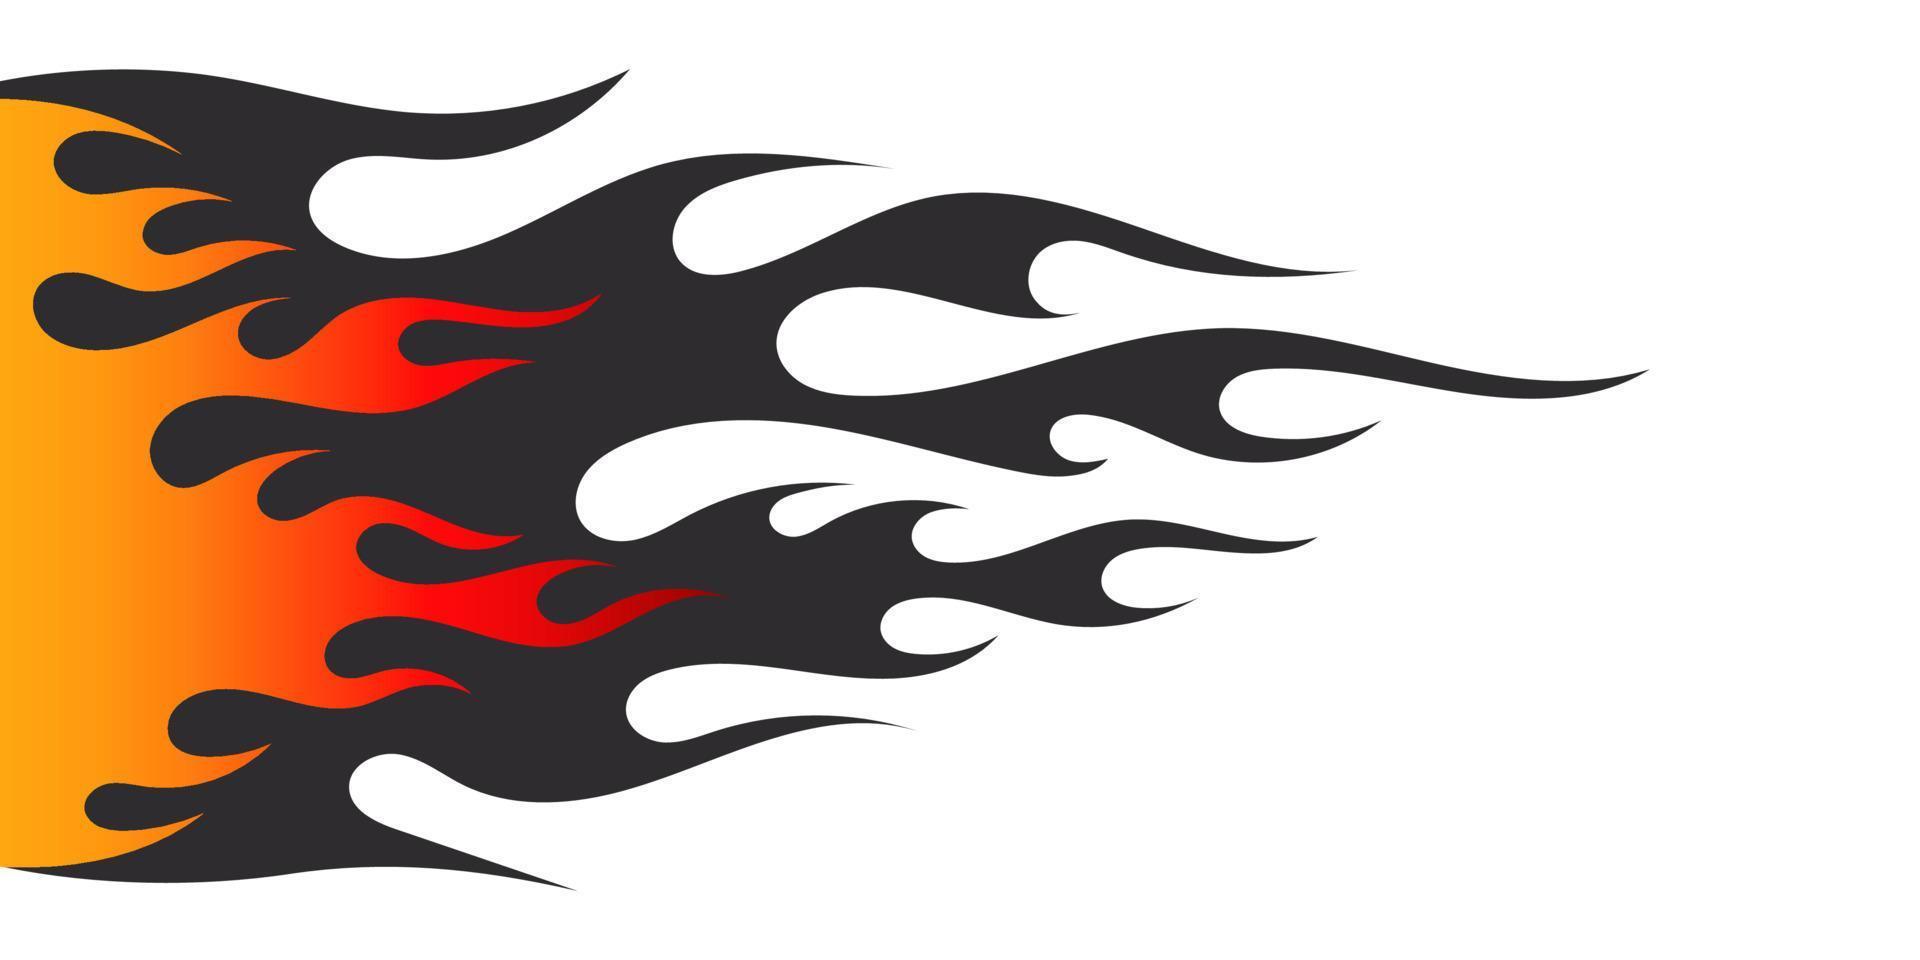 Fire flame. Flame silhouette. Black and red fiery flames. Vector scalable graphics